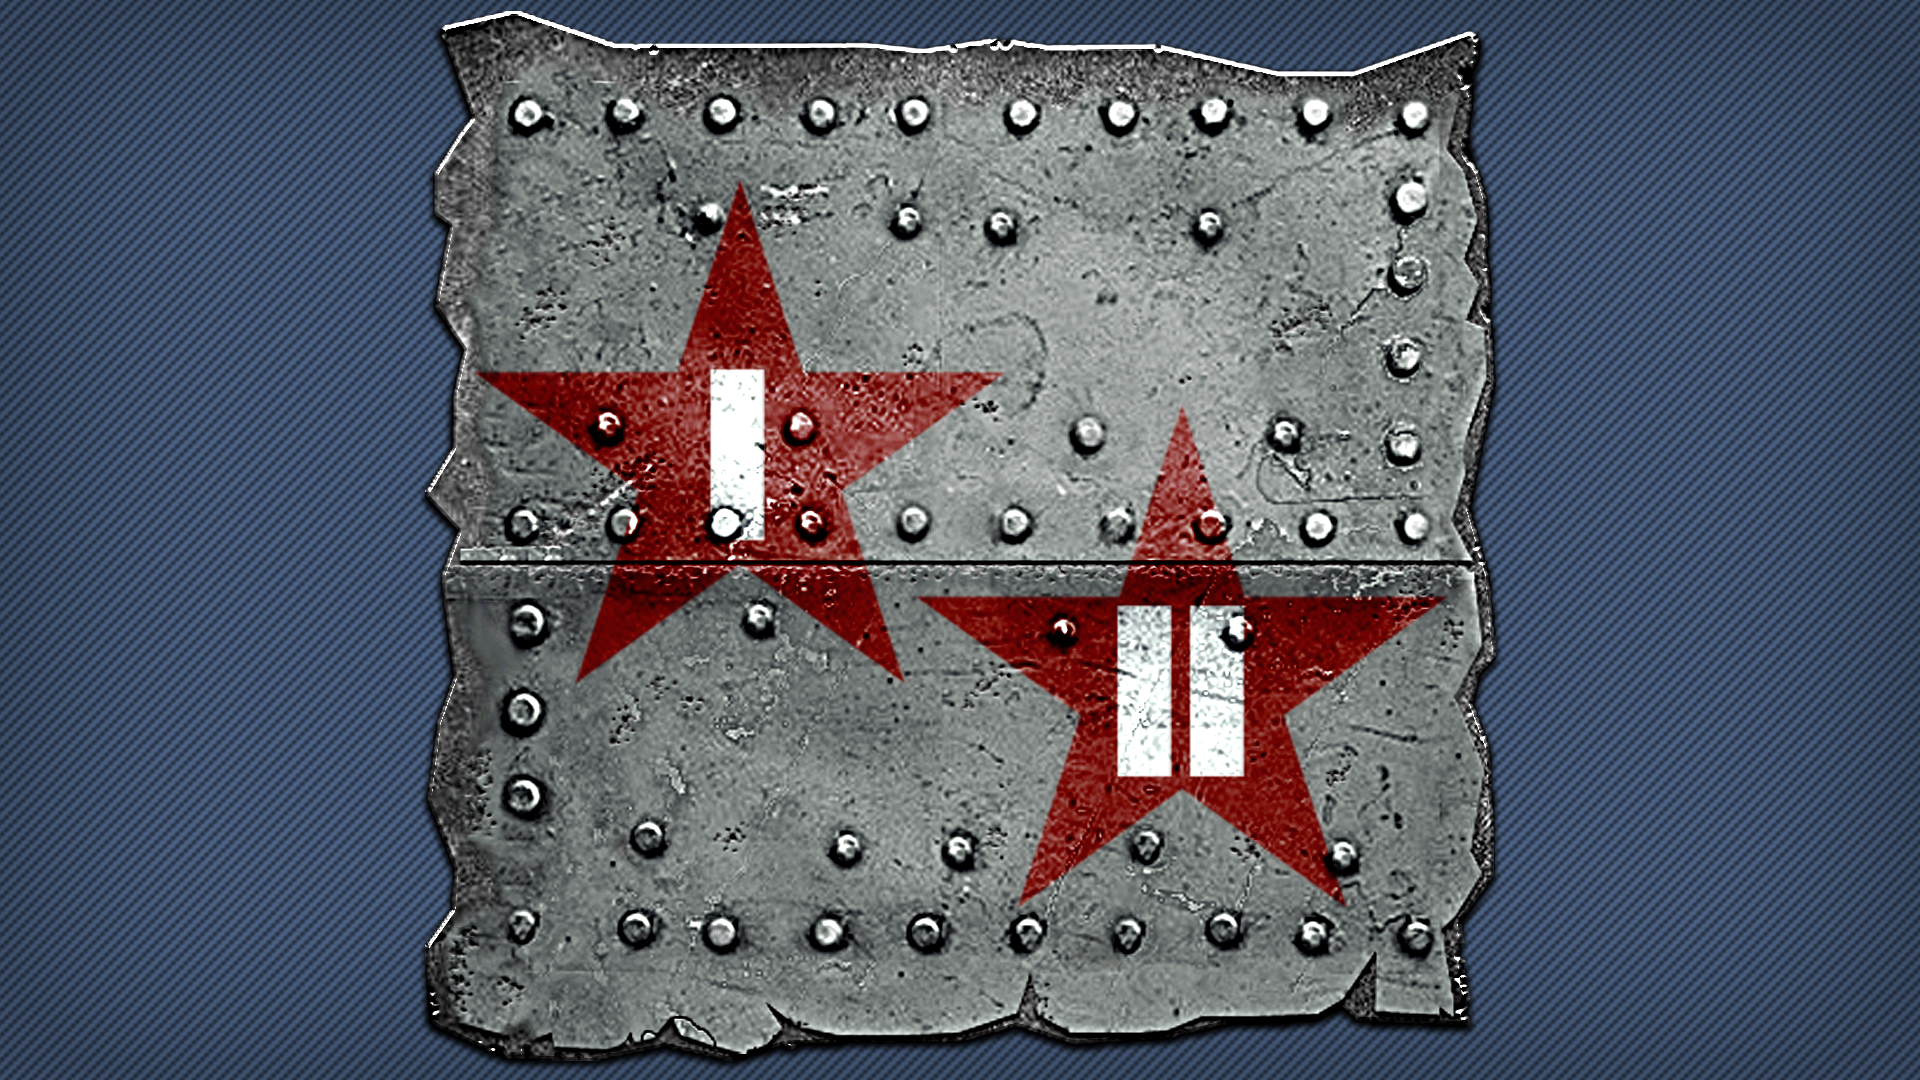 Icon for Red Dawn